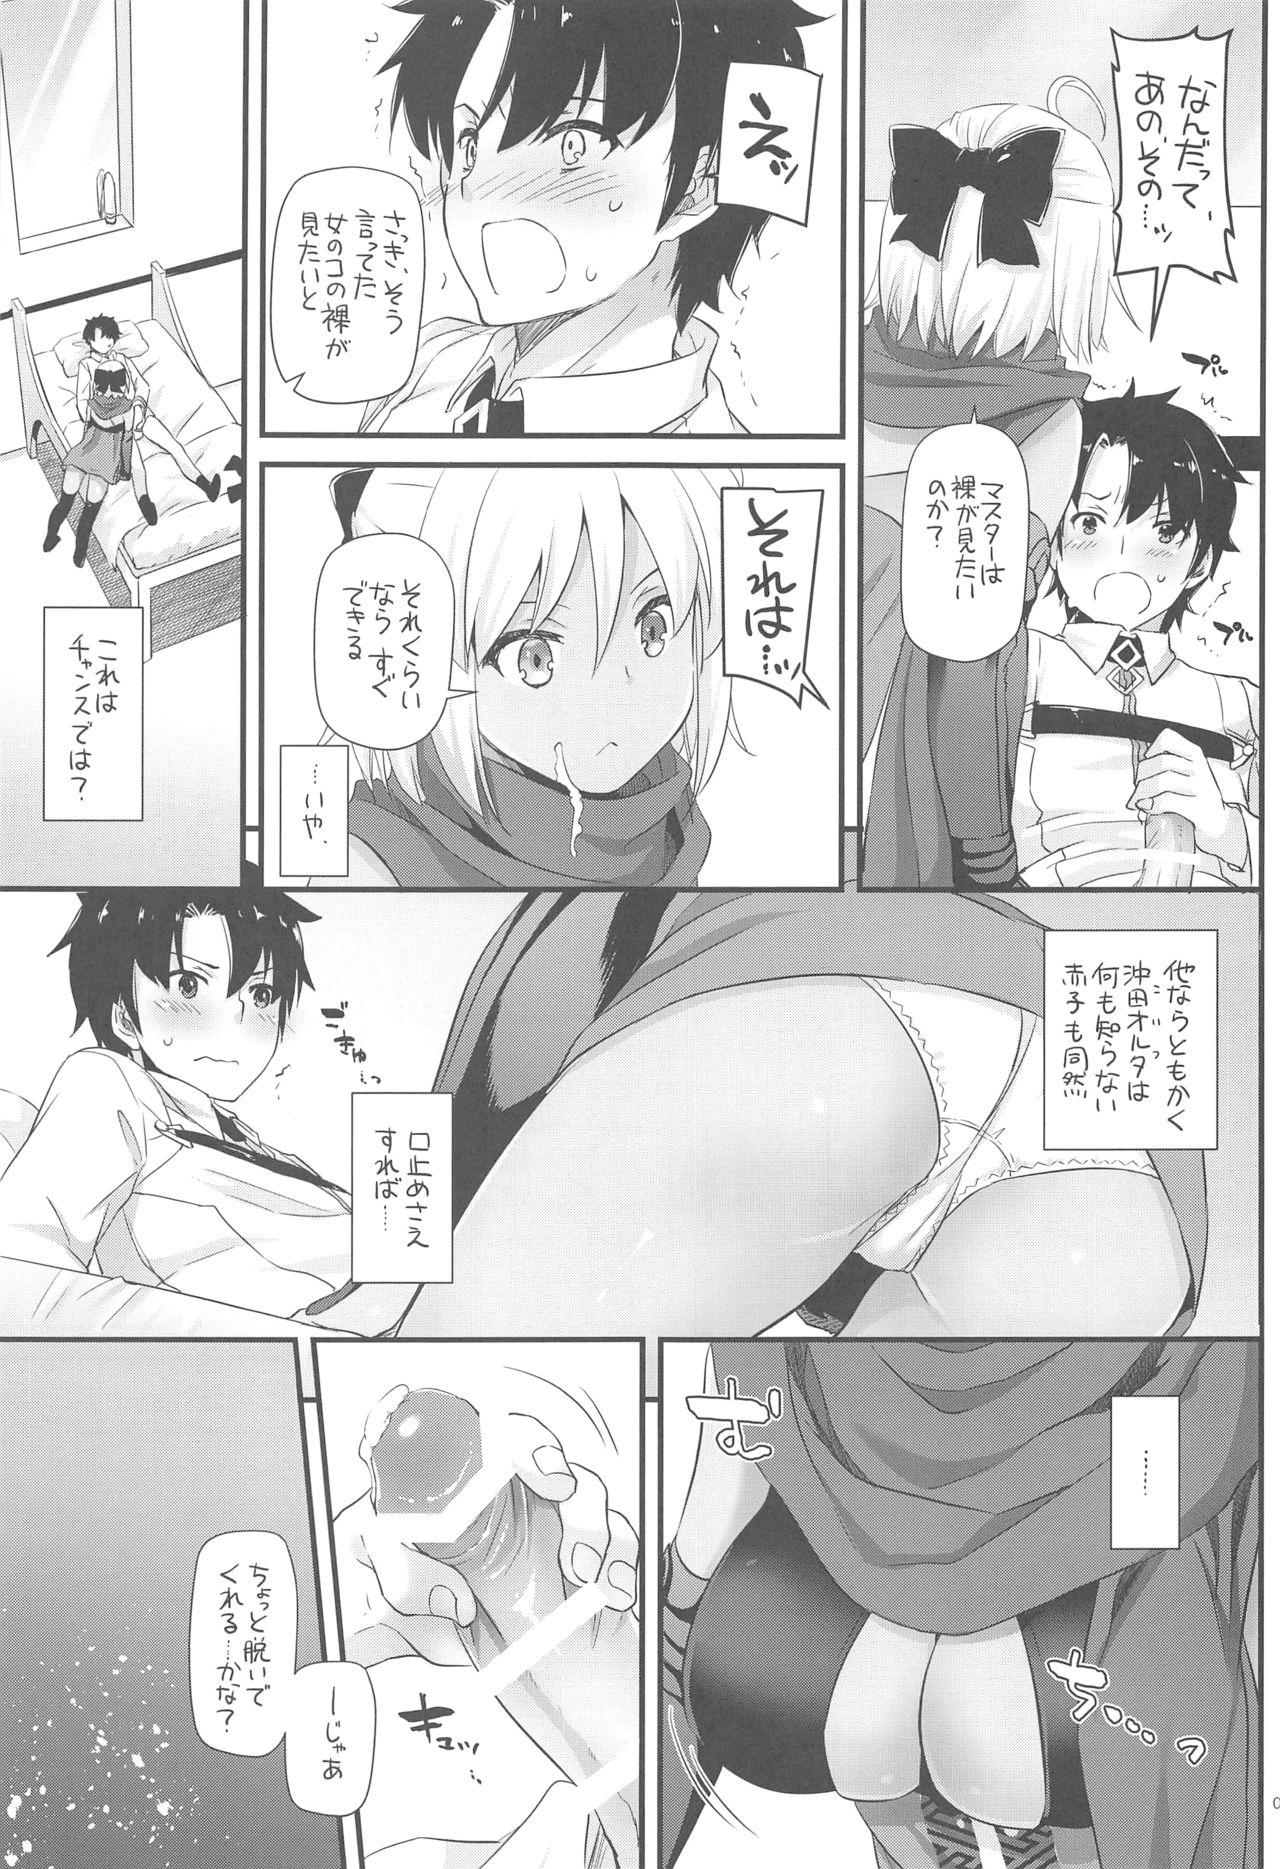 Condom D.L. action 123 - Fate grand order Tan - Page 8